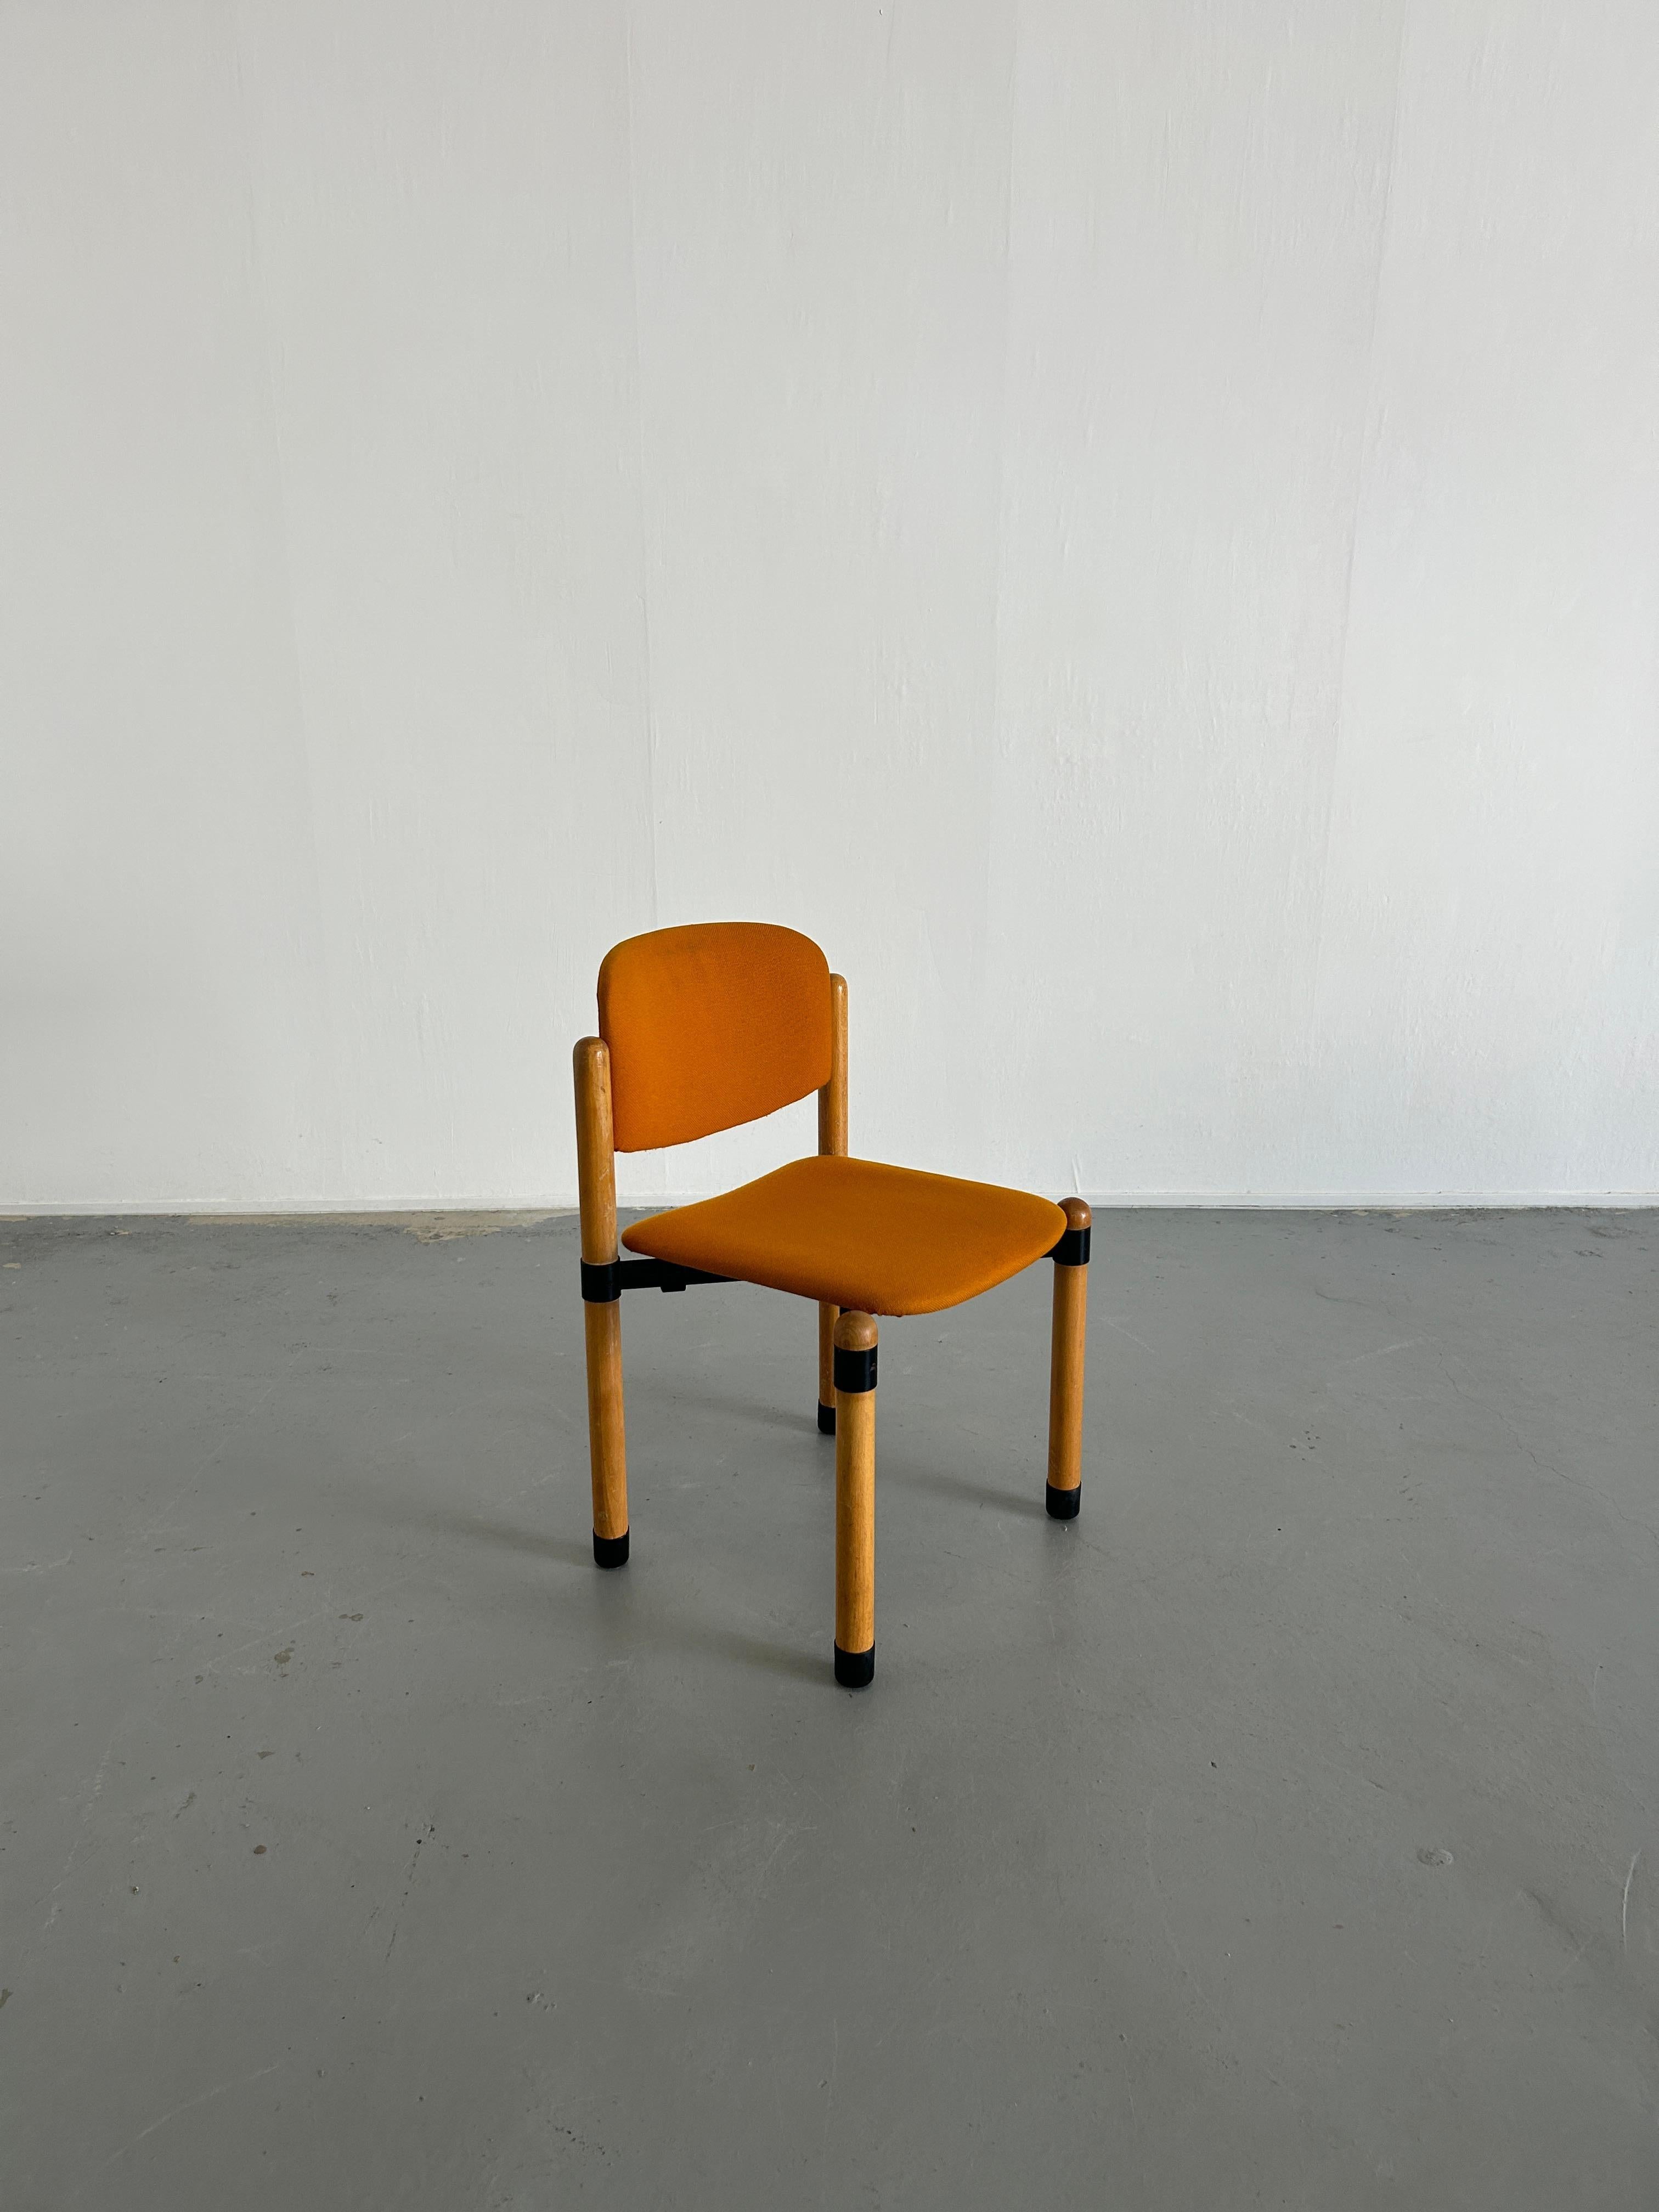 Wood 1/10 Mid Century Modern Stackable Dining Chairs by Fröscher Sitform, 70s Germany